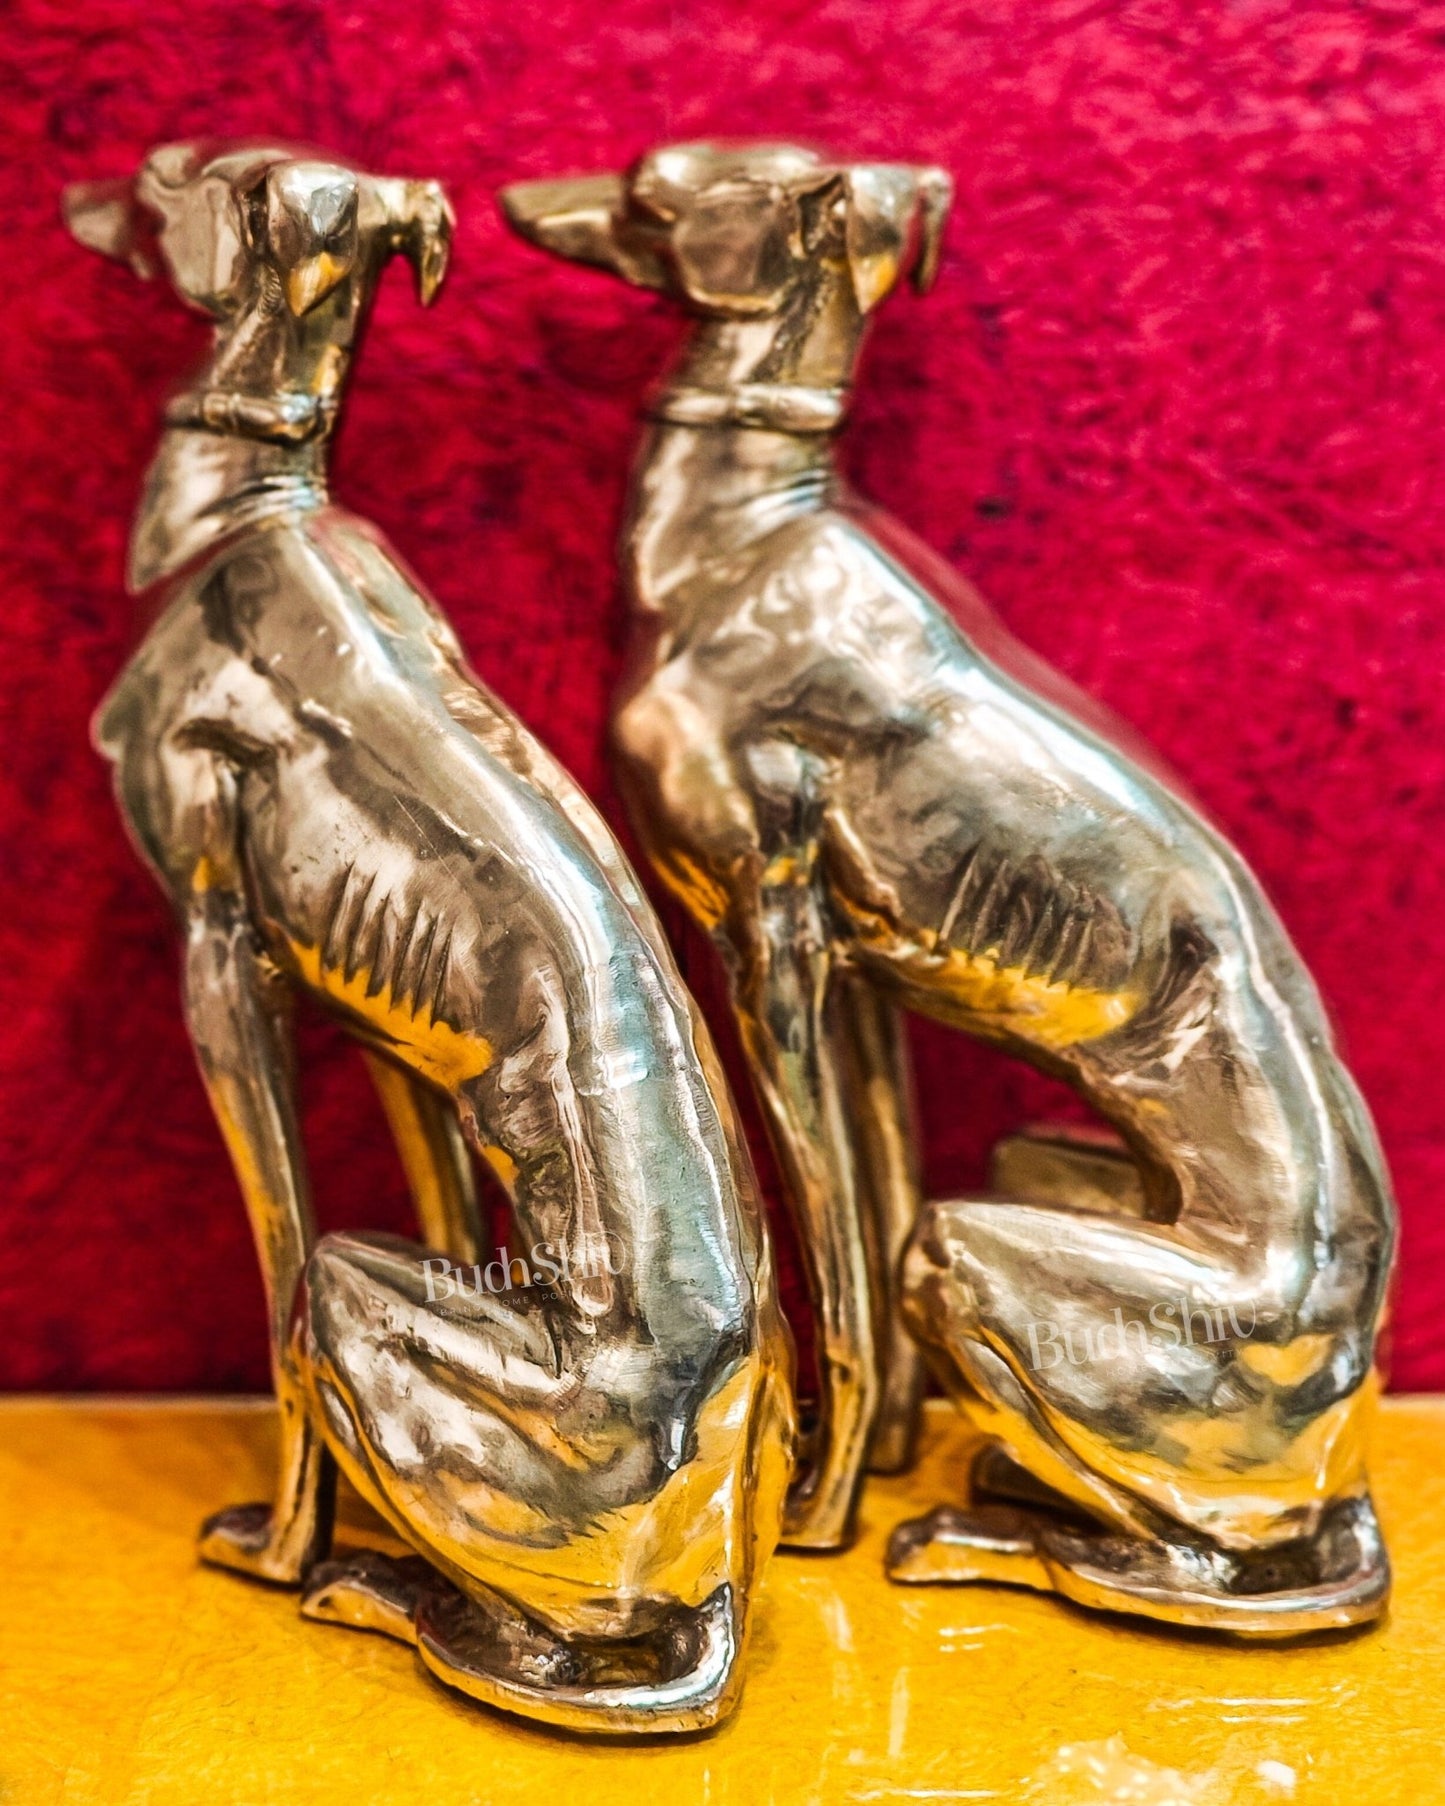 Brass Dog Statues - Pair or Single Piece - Height 23 inches - Budhshiv.com